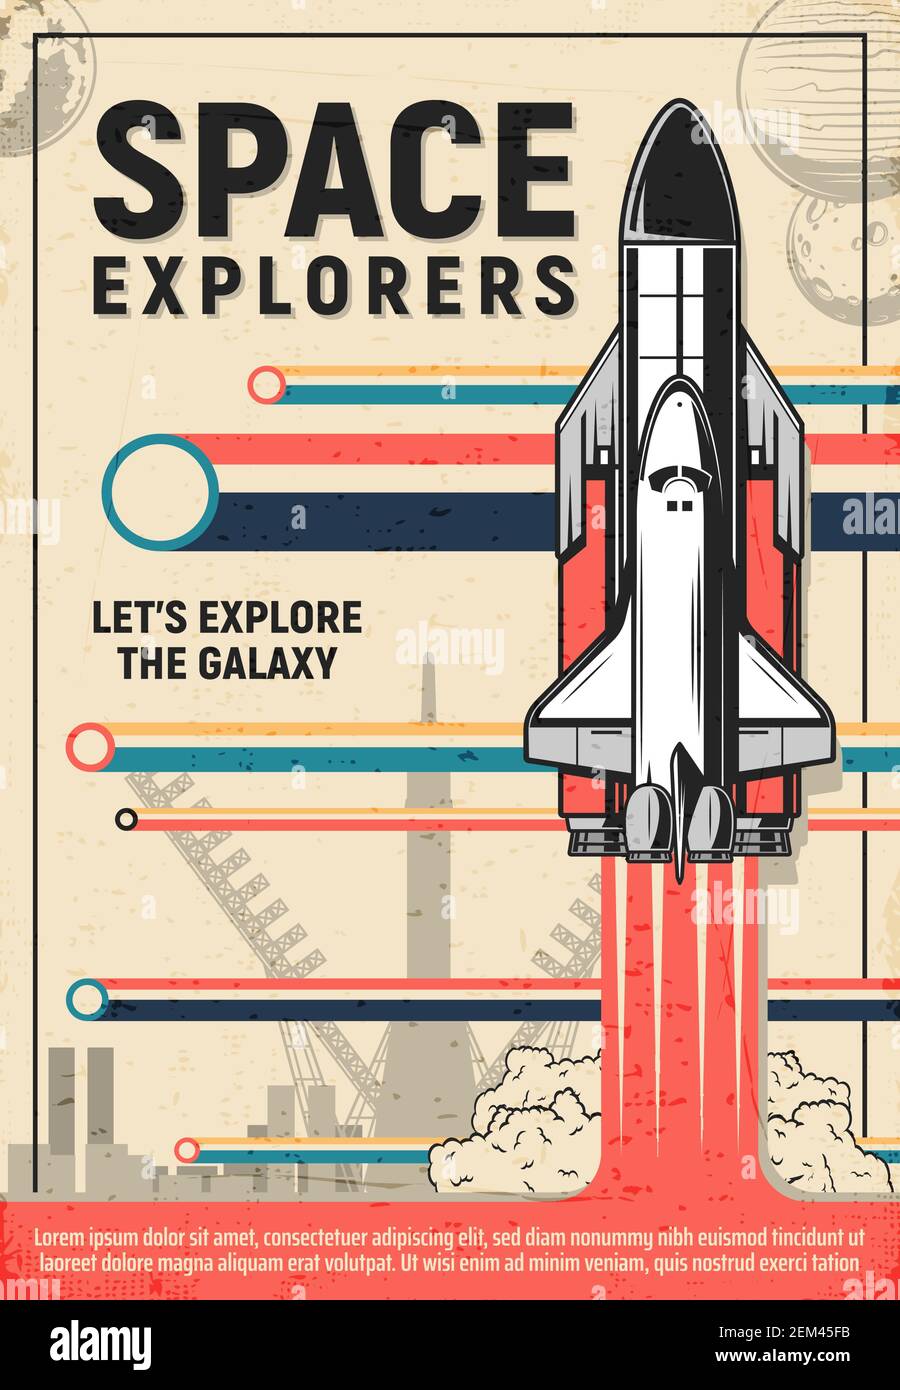 space launch vehicle posters